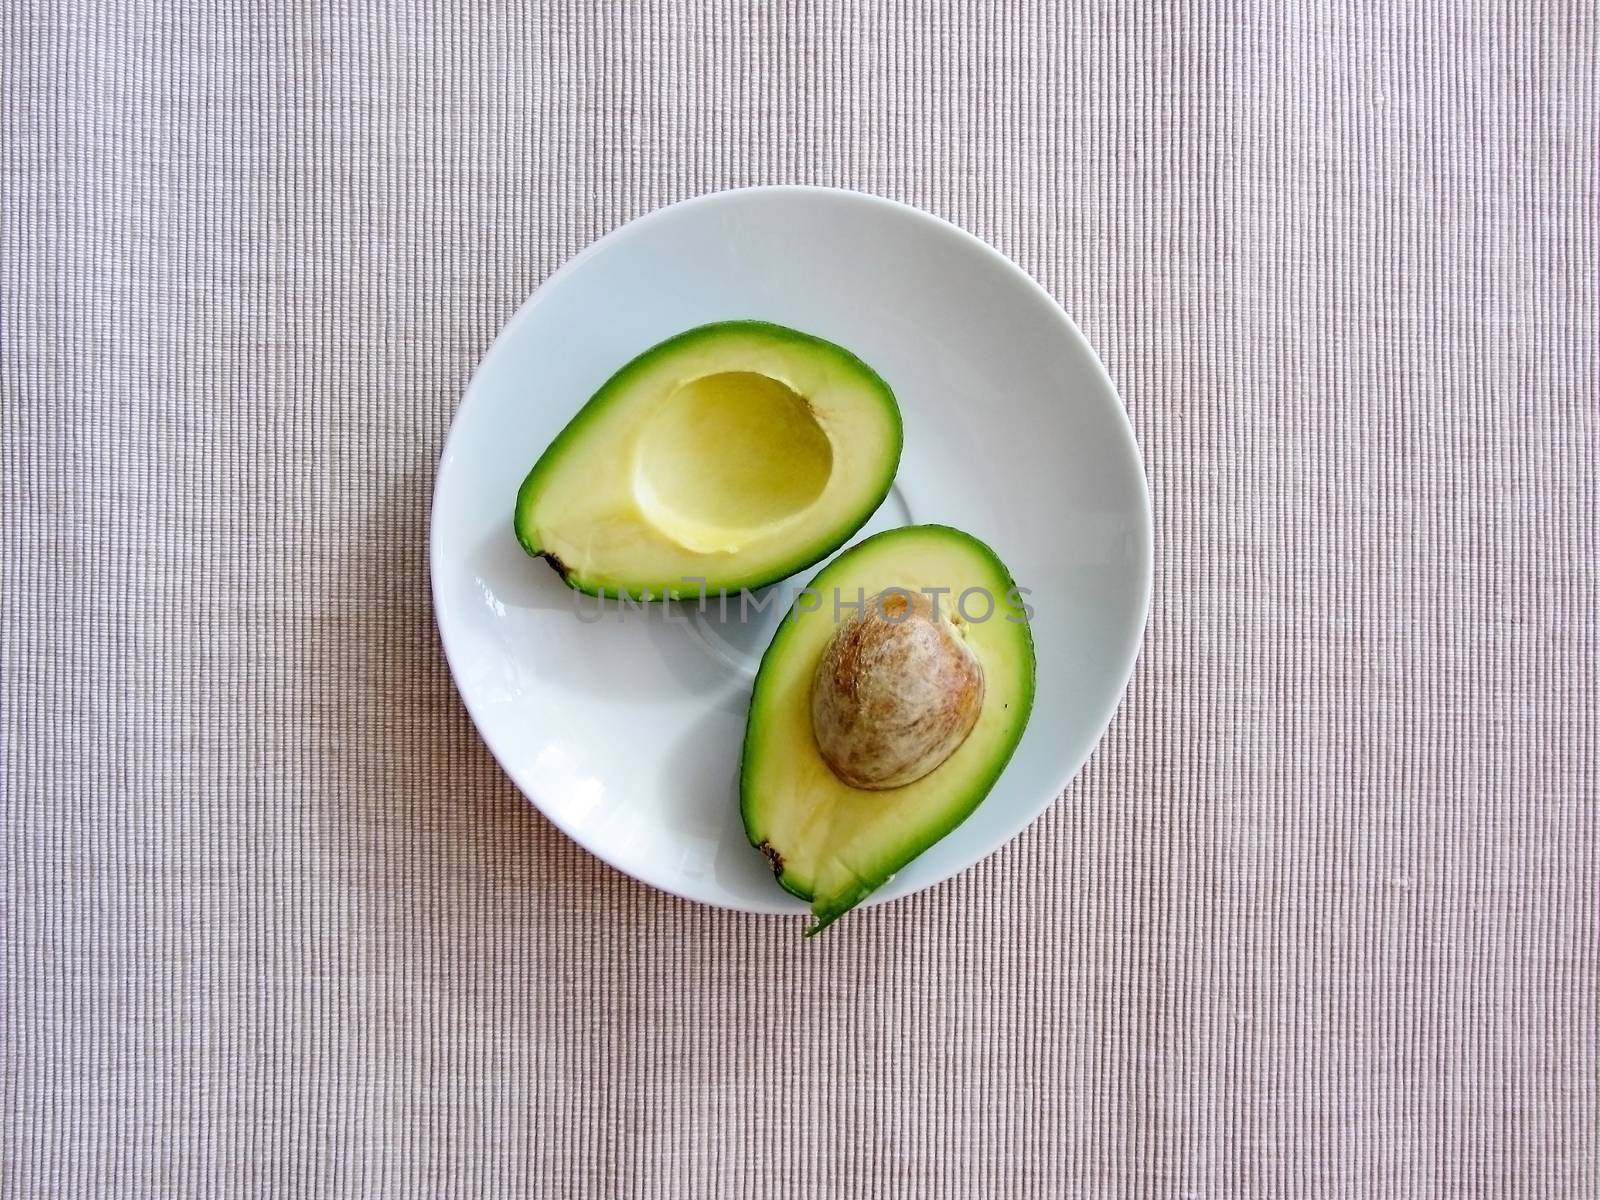 Fresh organic avocado halves, one with a bone, lie on a white plate on a grey cotton striped textured canvas, flat lay. Healthy food concept..